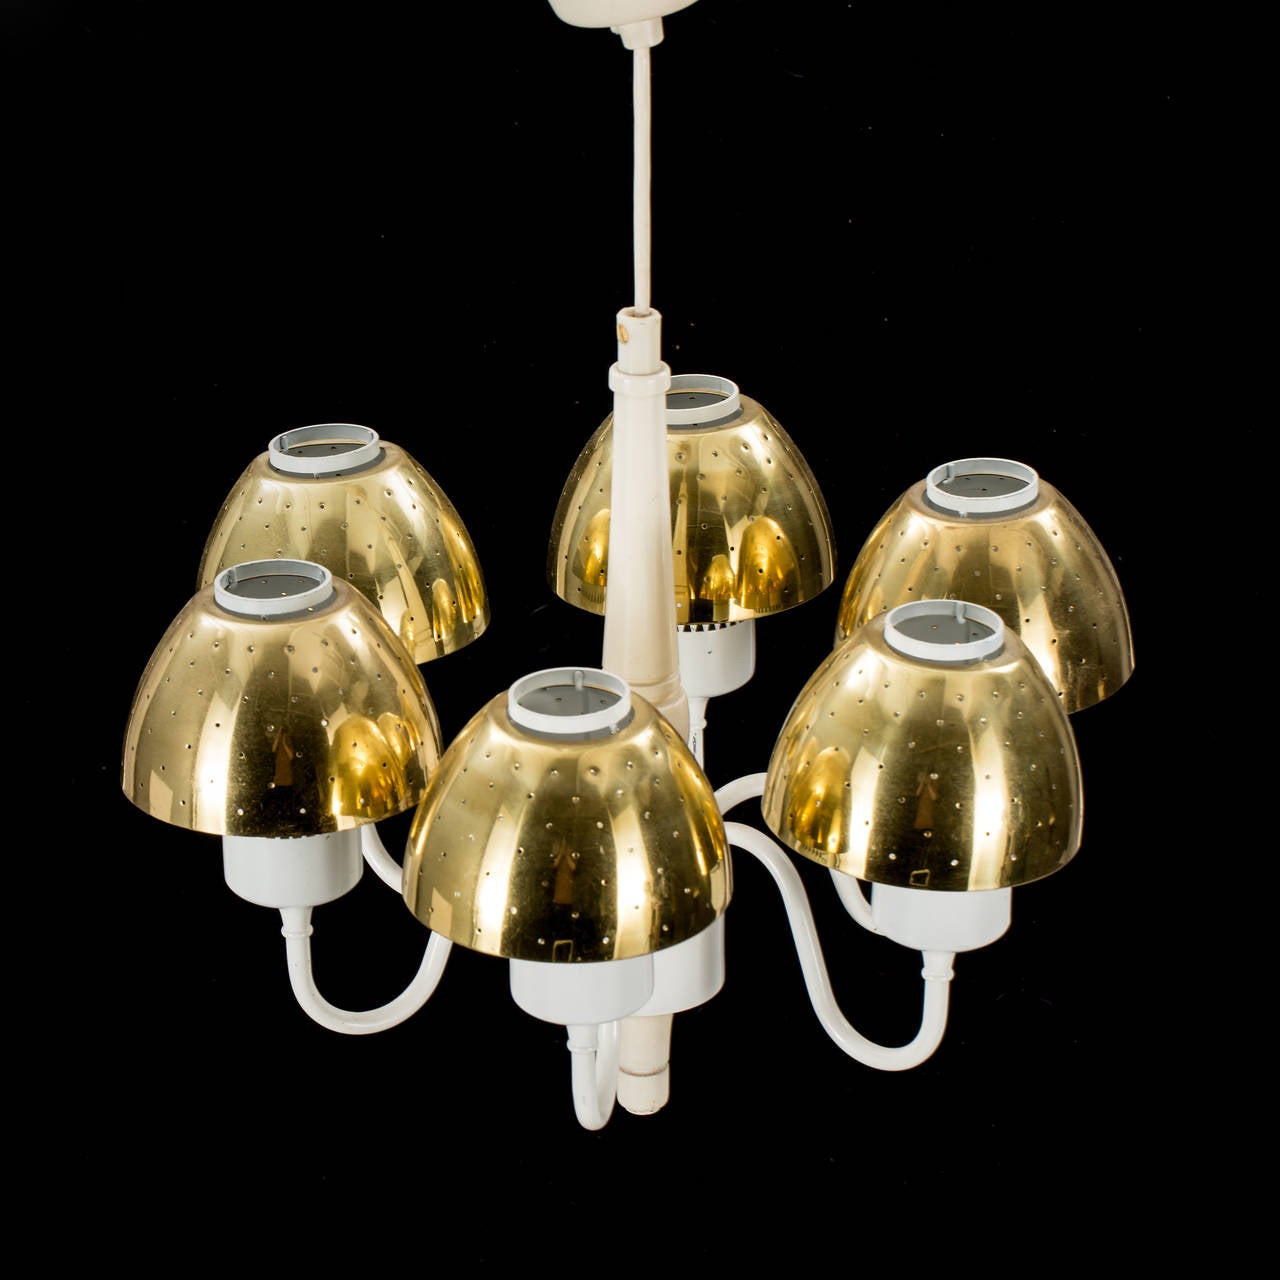 A pendant by Hans Agne Jakobsson for Markaryd, Sweden.
Existing European wiring we do not guaranty functionality.
Rewiring available upon request.